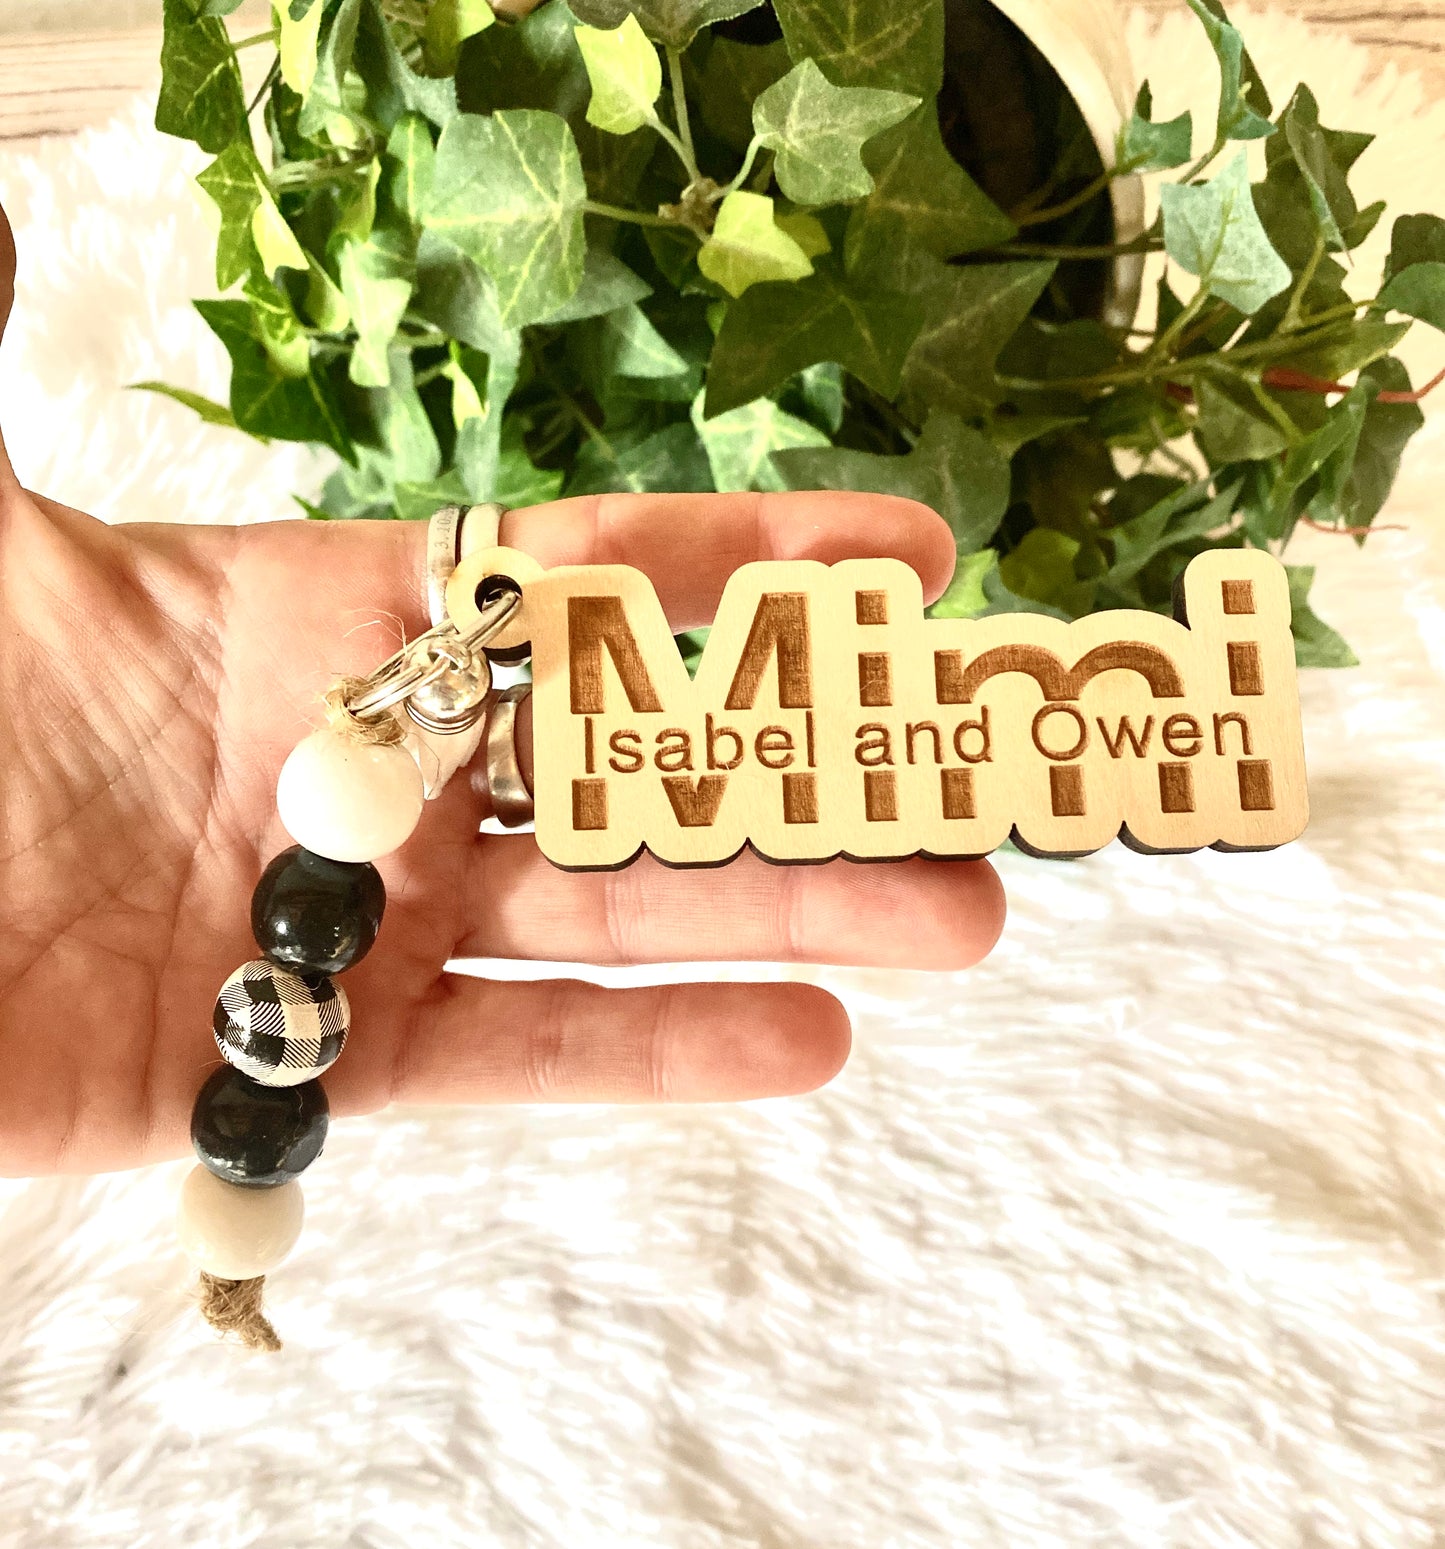 Mimi Personalized Keychain with Kids Names, Wood Engraved Mimi Keychain, Mother's Day Gift from Grandkids, Grandma Gift